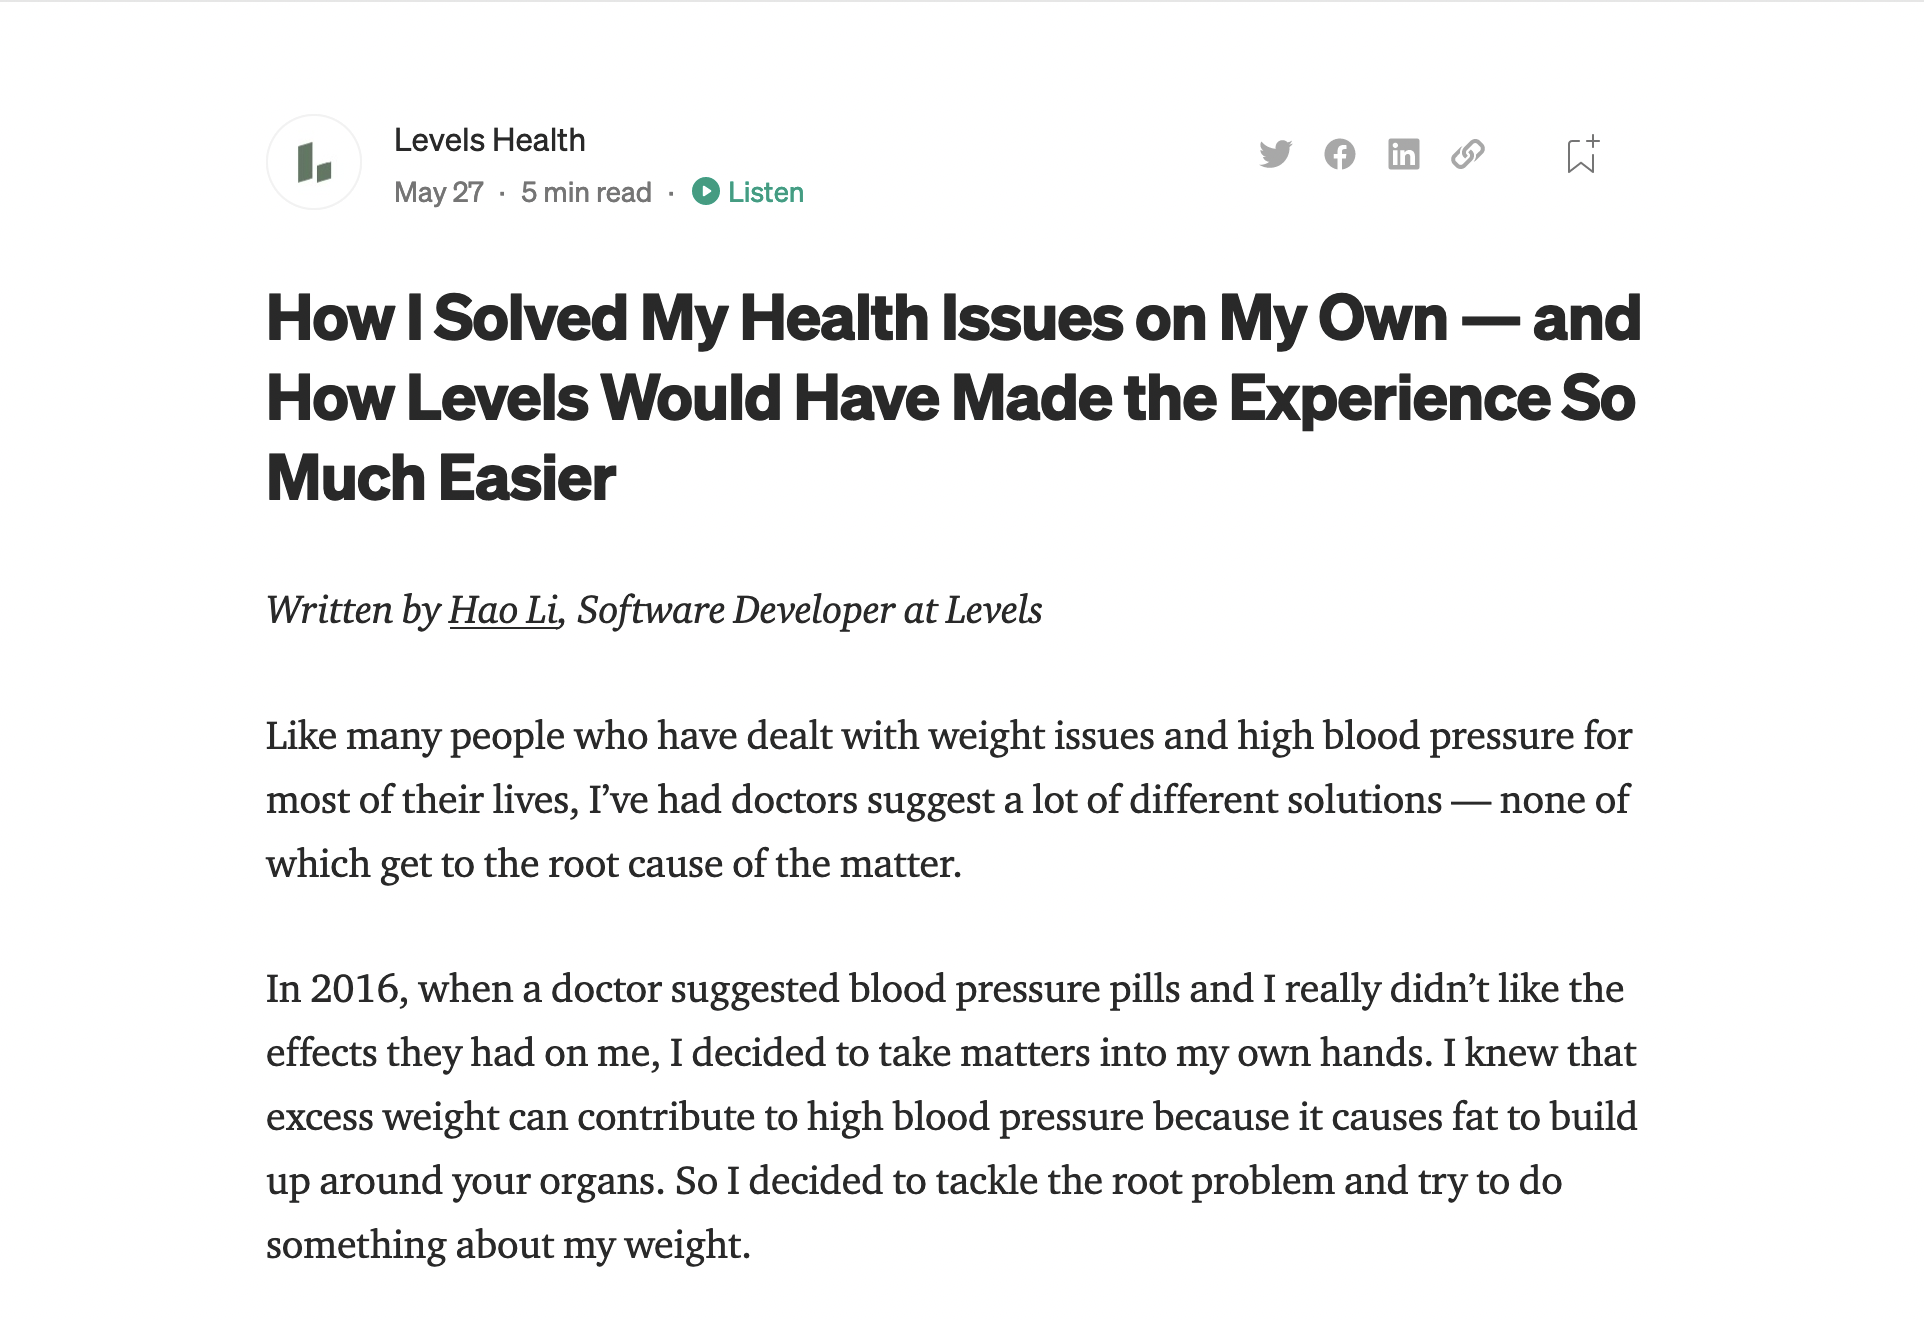 How I Solved My Health Issues on My Own — and How Levels Would Have Made the Experience So Much Easier